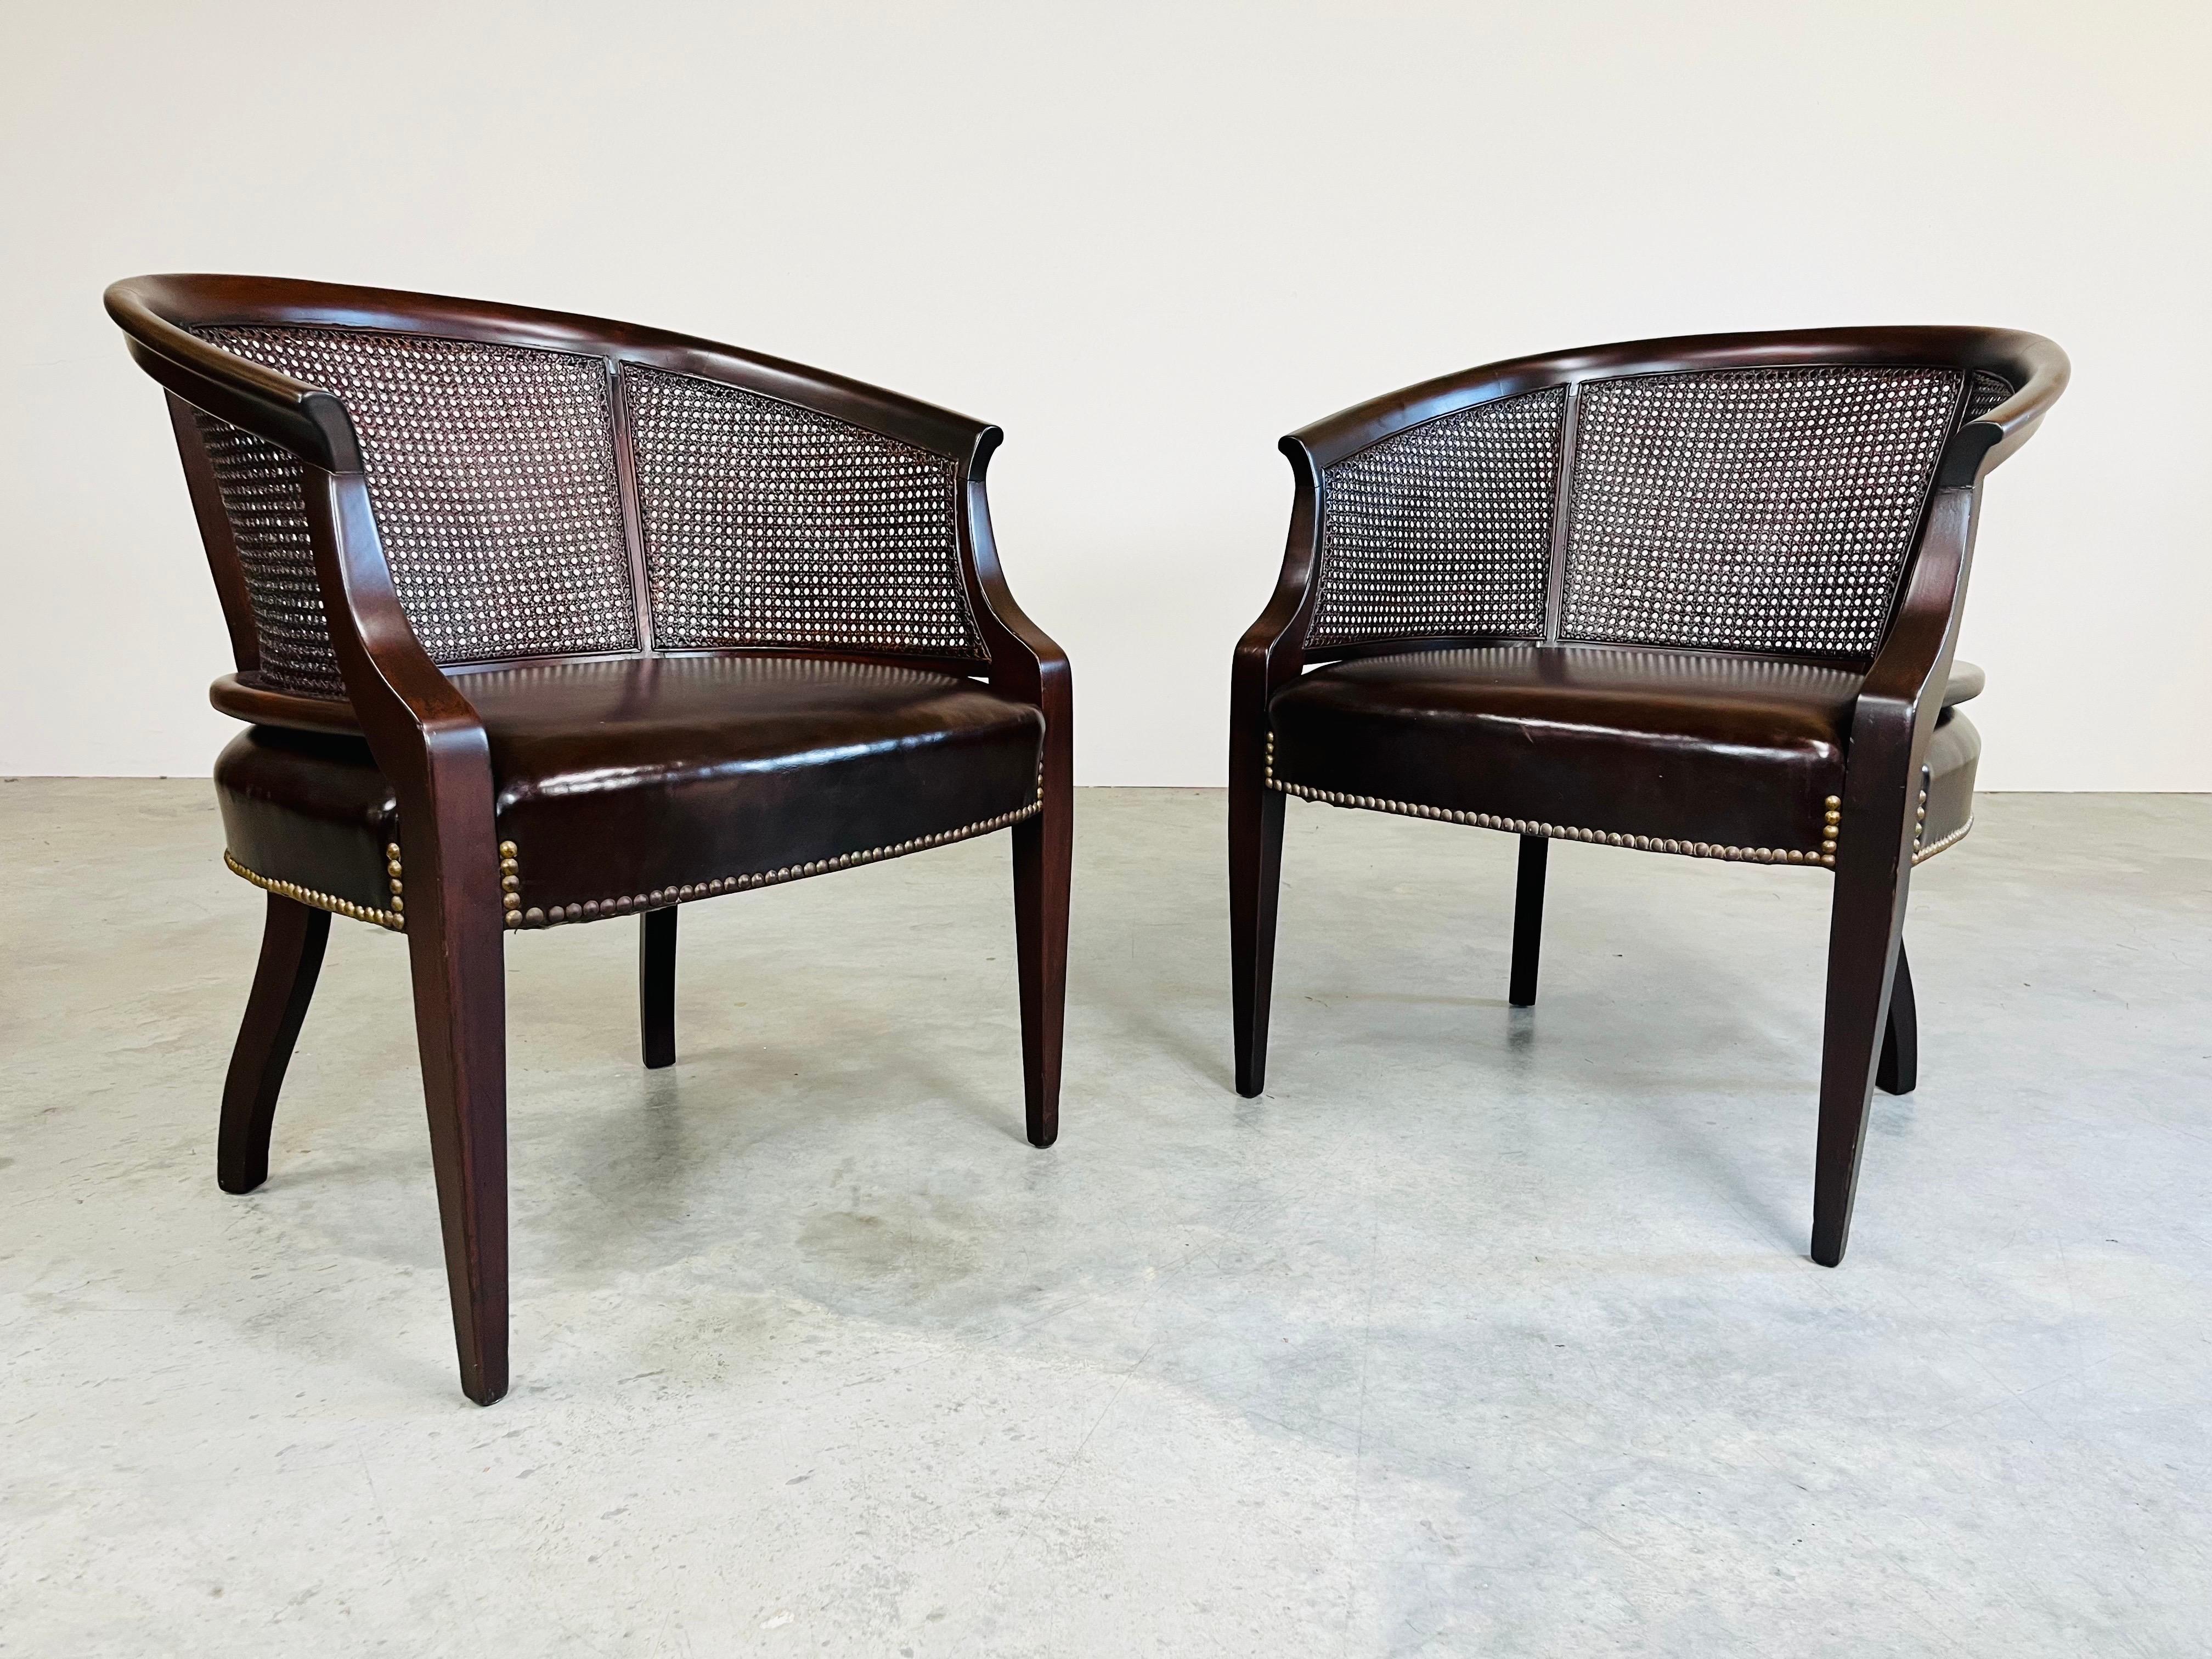 A beautiful matched pair of cane barrel back club chairs with lithe front legs by Hickory Chair Co. having beautiful, supple original leather. 1960’s production. 
Beautiful, clean condition. No breaks or punctures to any of the caning. Structurally